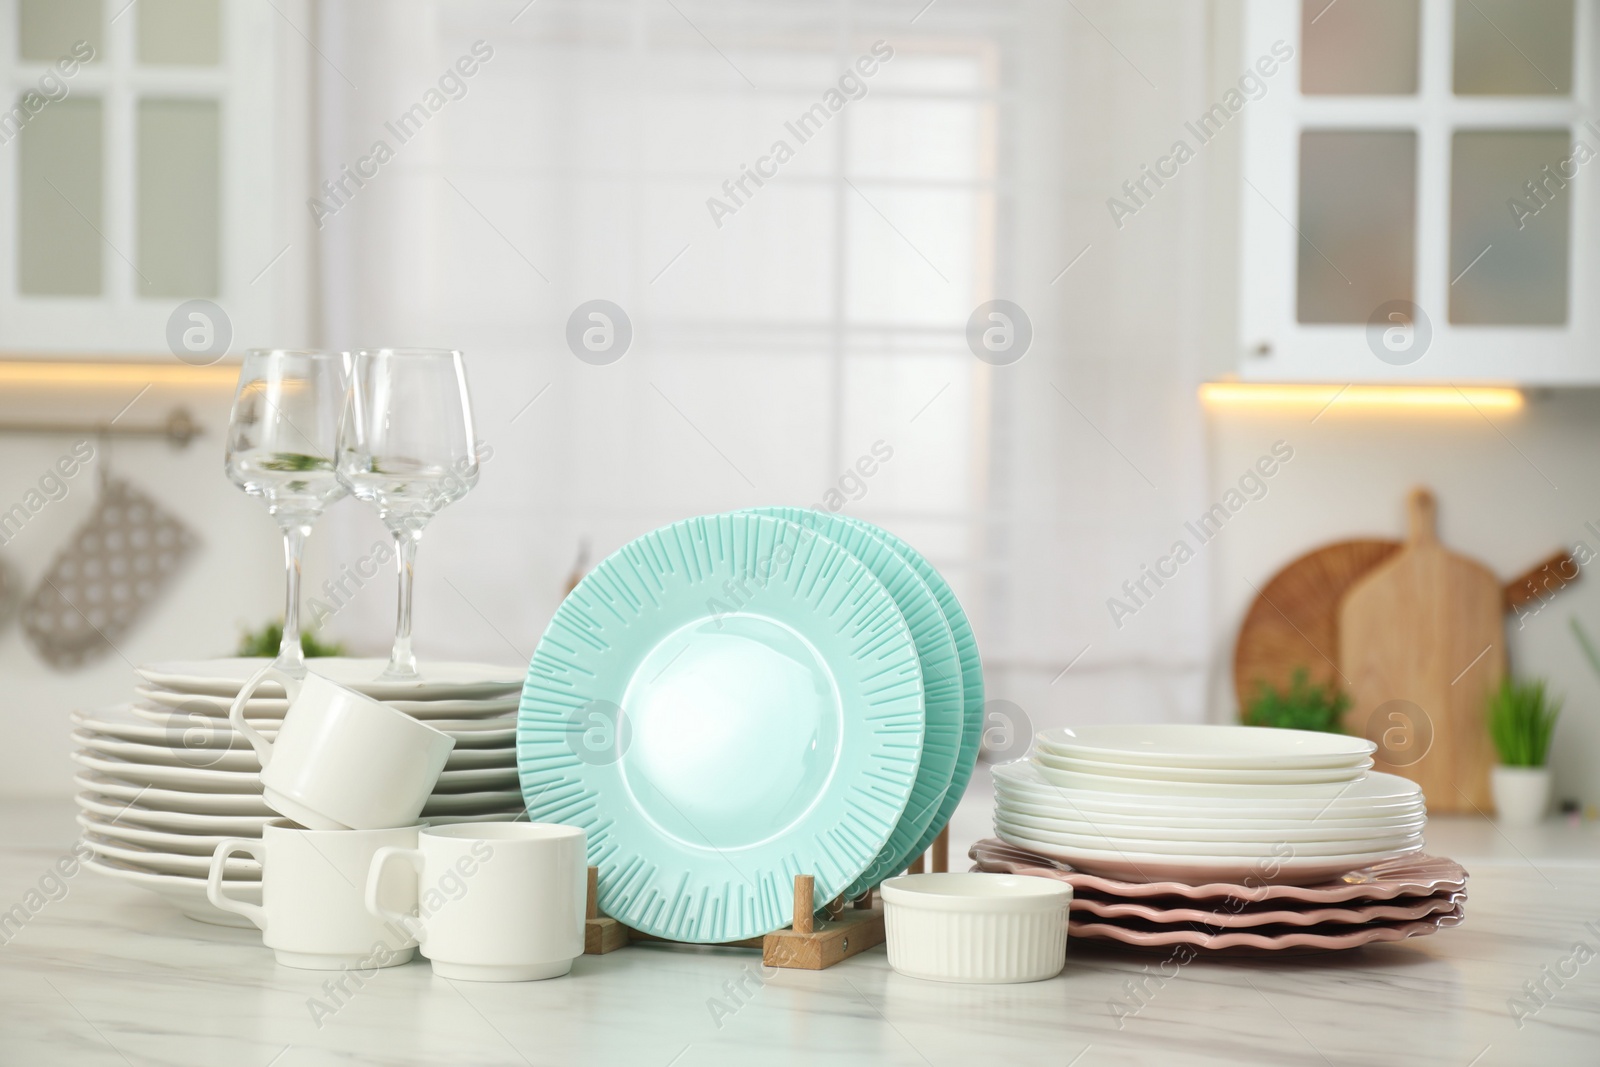 Photo of Clean plates, cups, glasses and bowl on white marble table in kitchen